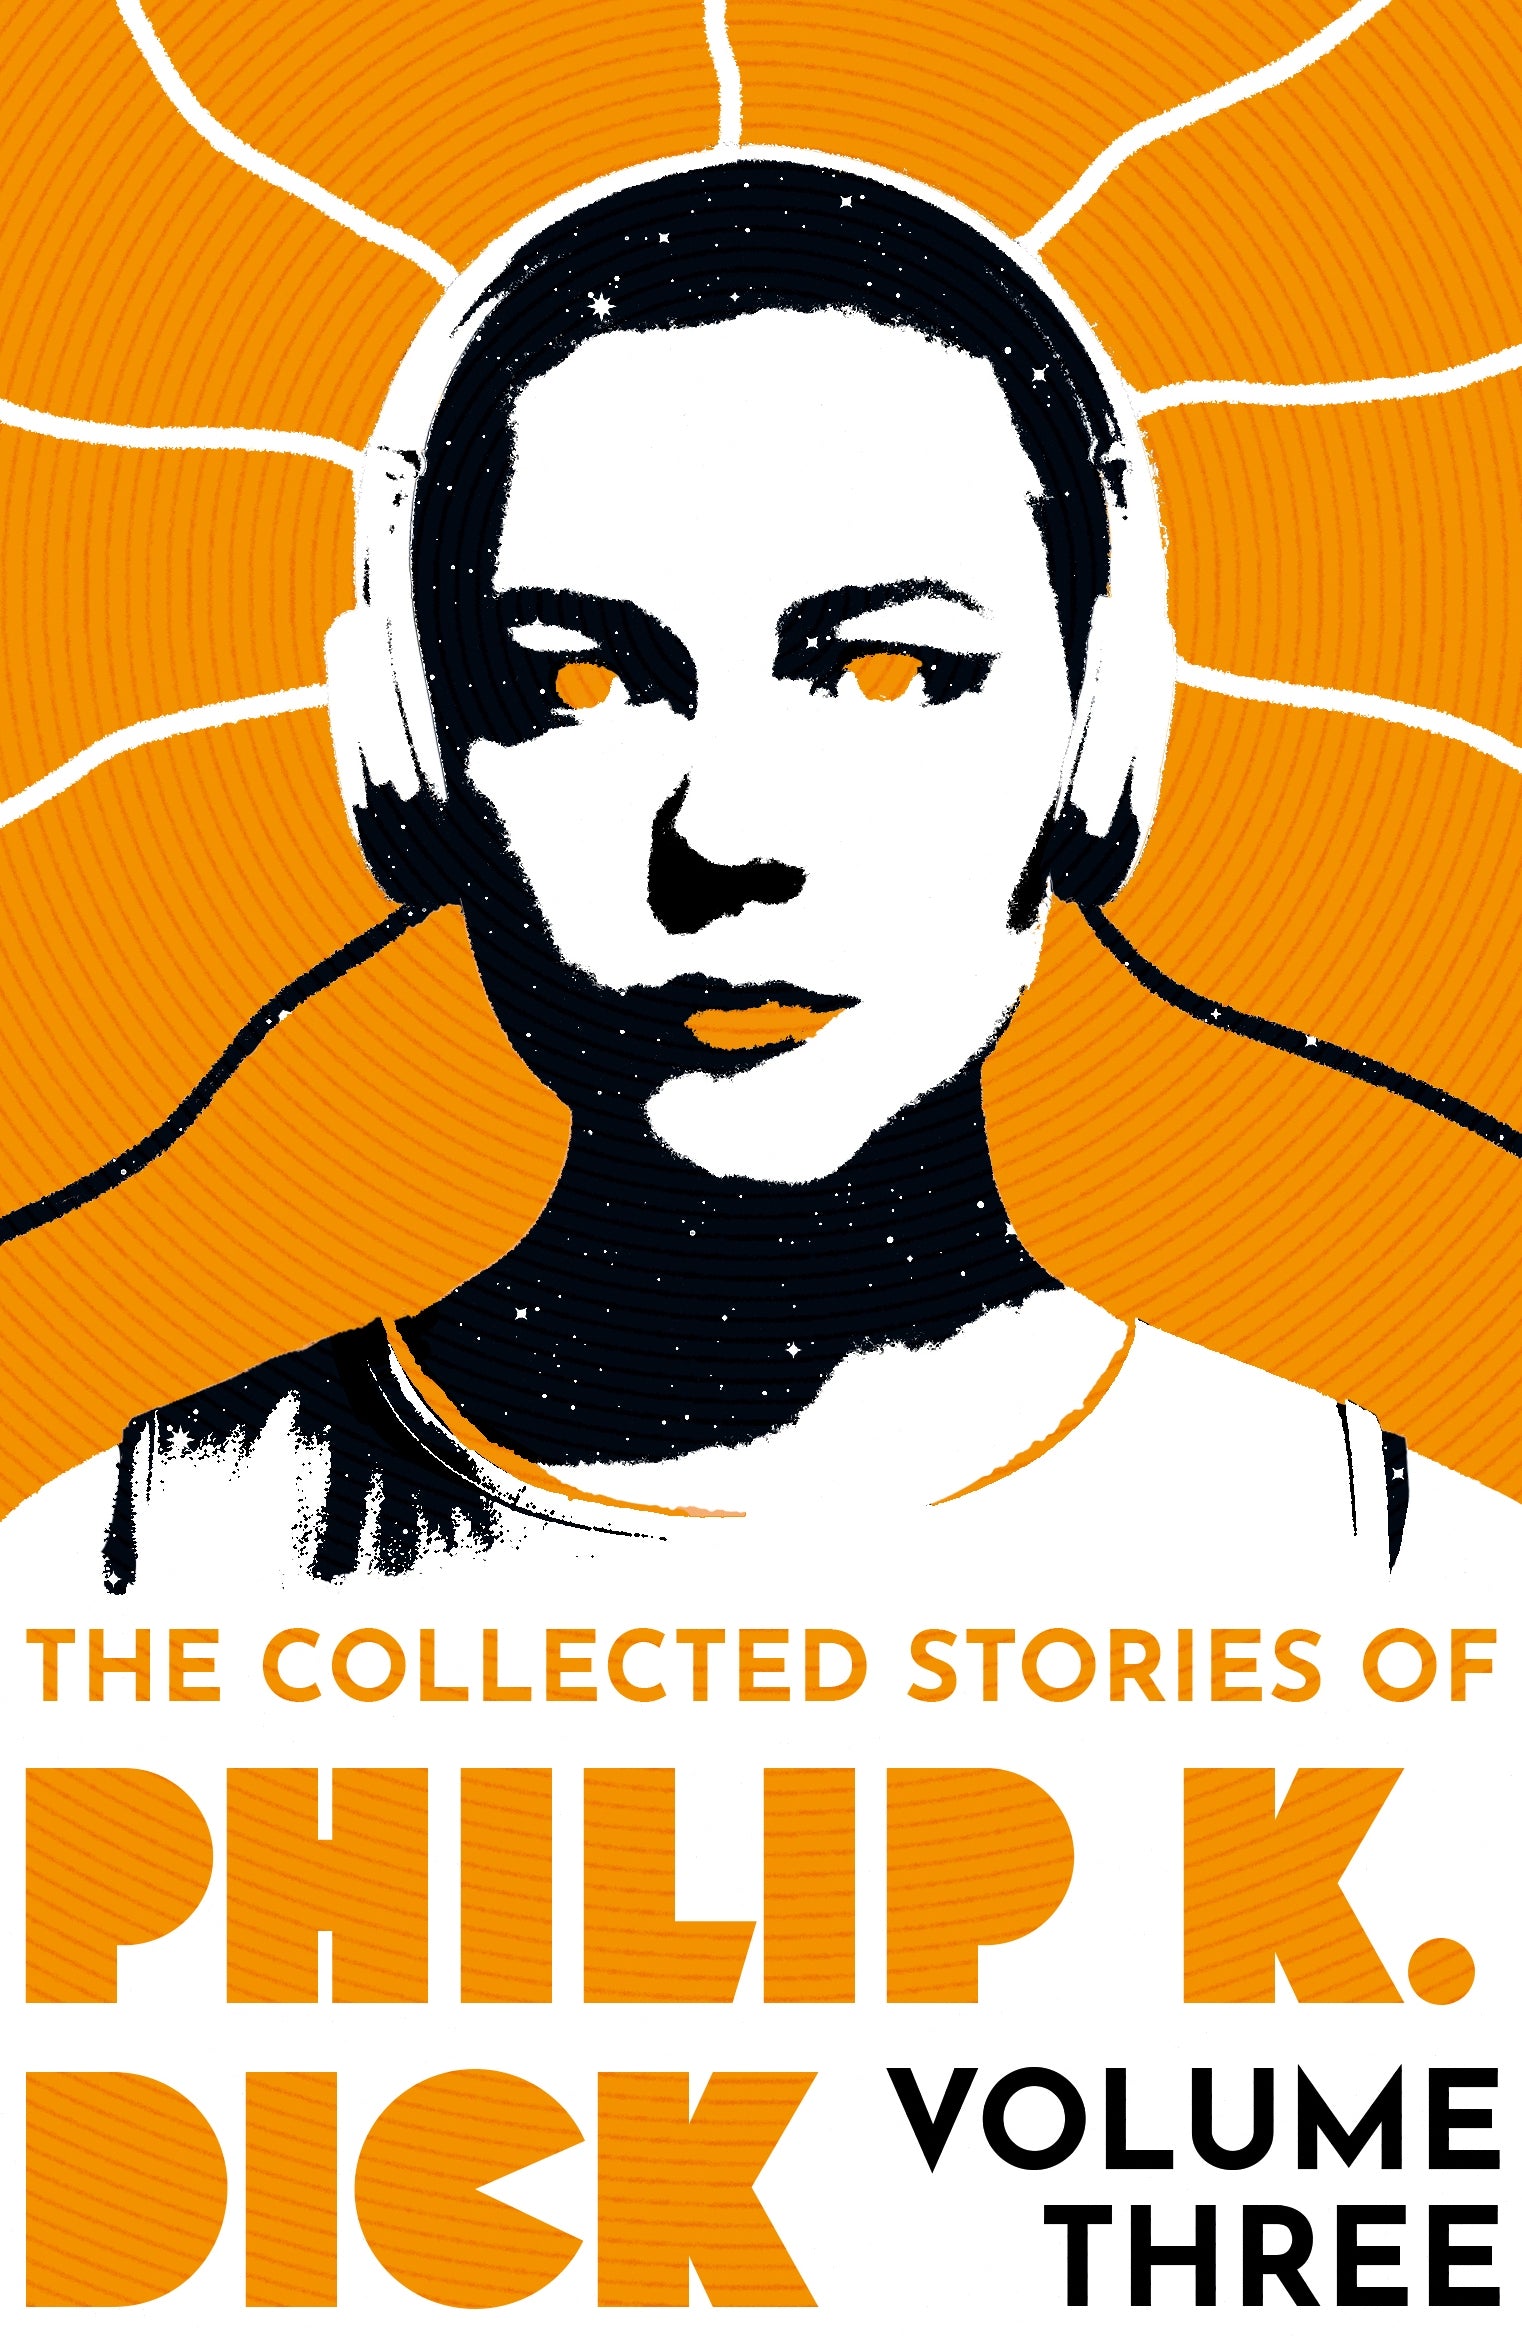 The Collected Stories of Philip K. Dick Volume 3 by Philip K Dick